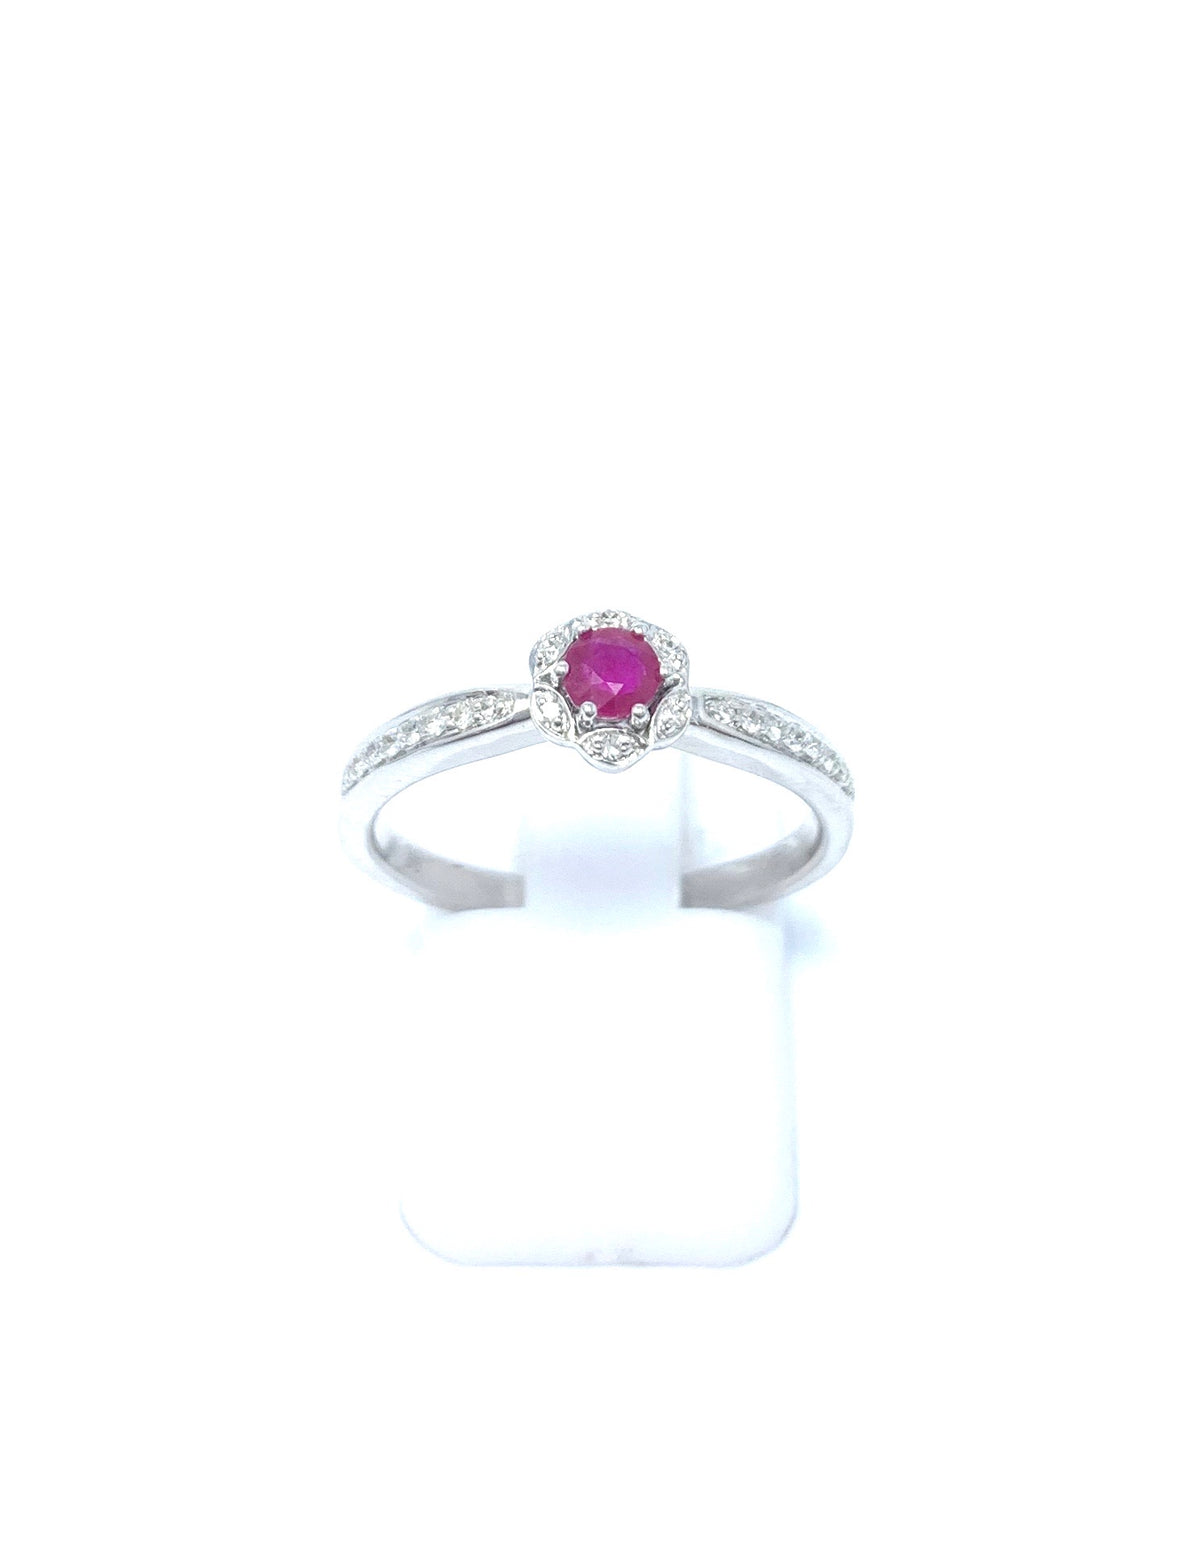 14K White Gold Ruby and Diamond Ring-Size 6.5